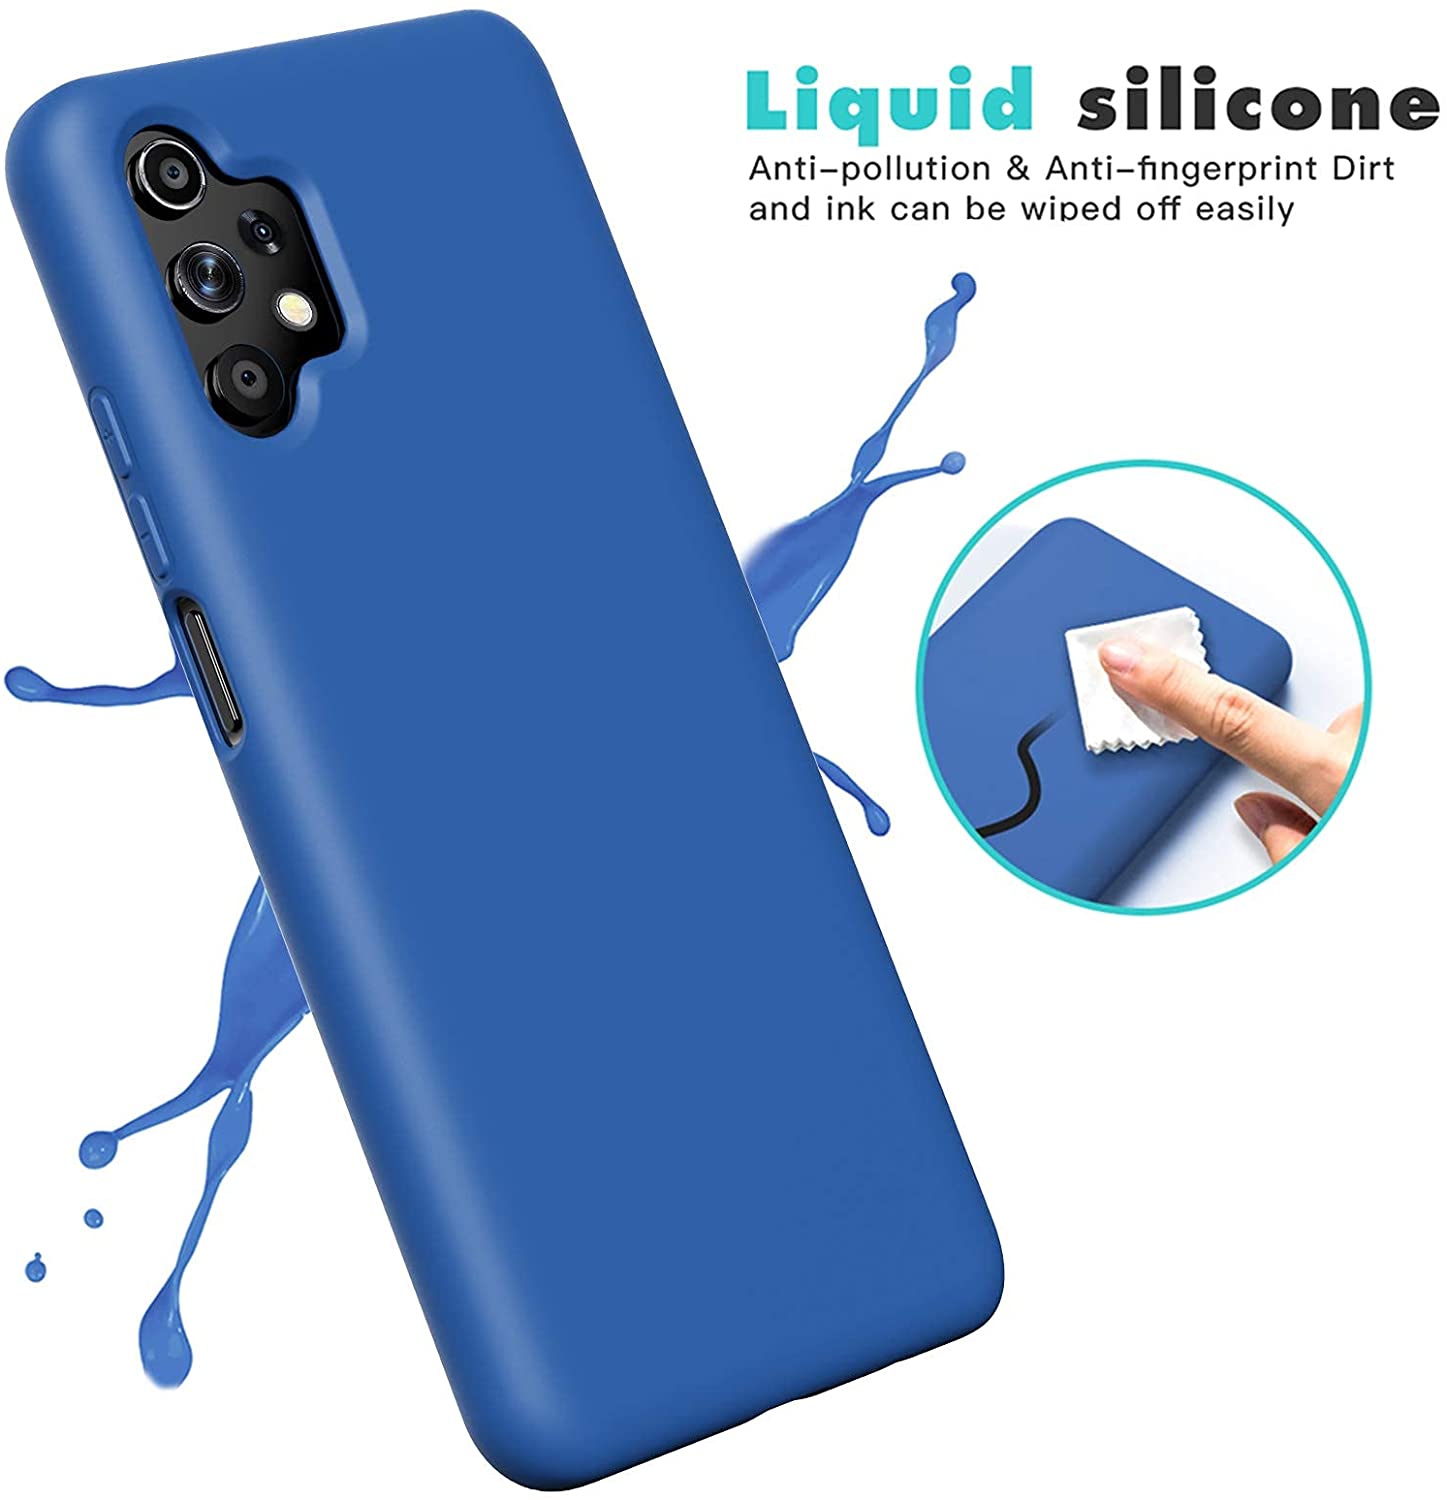 Samsung A32 5G phone case Soft Flexible Rubber Protective Cover blue liquid silicone